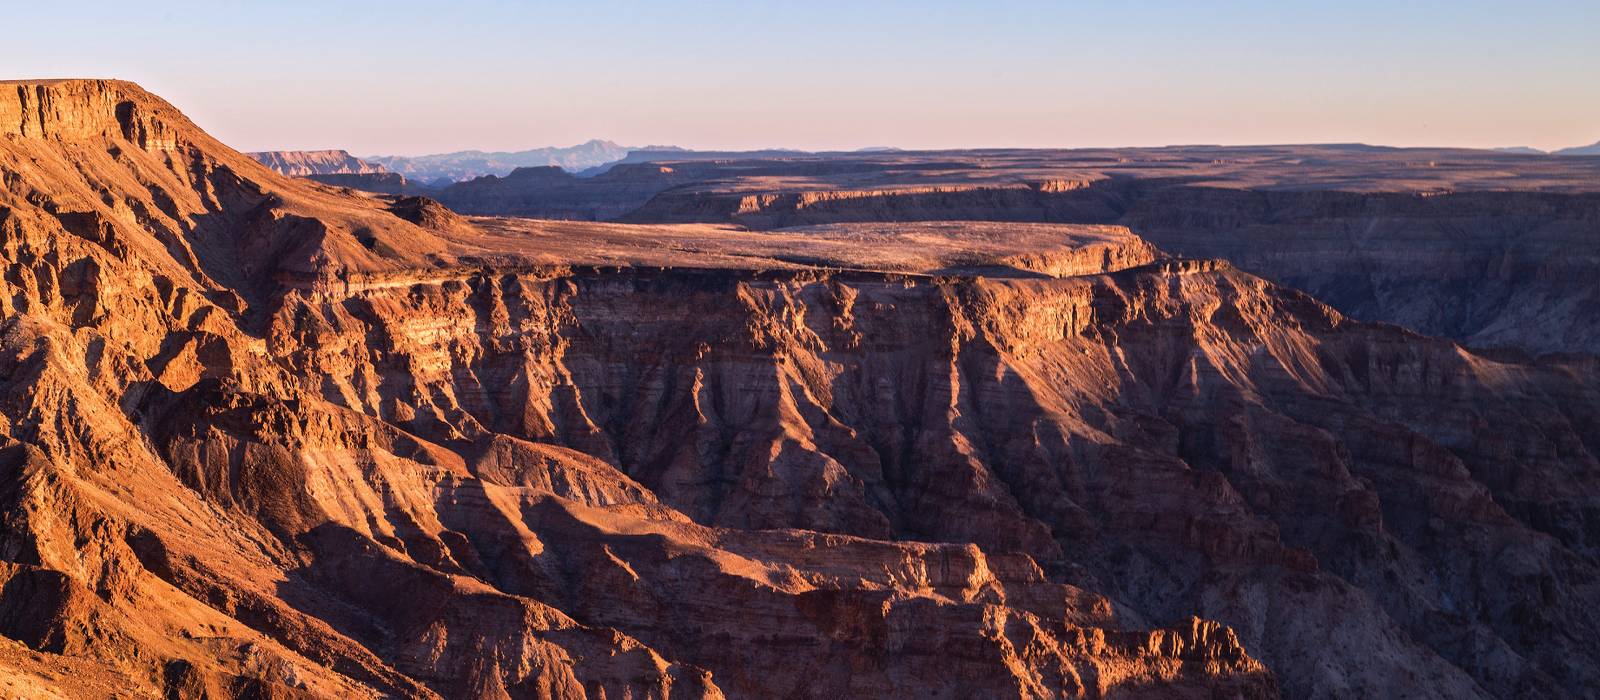 The vast and rugged terrain of Namibia's Fish River Canyon |  <i>Peter Walton</i>